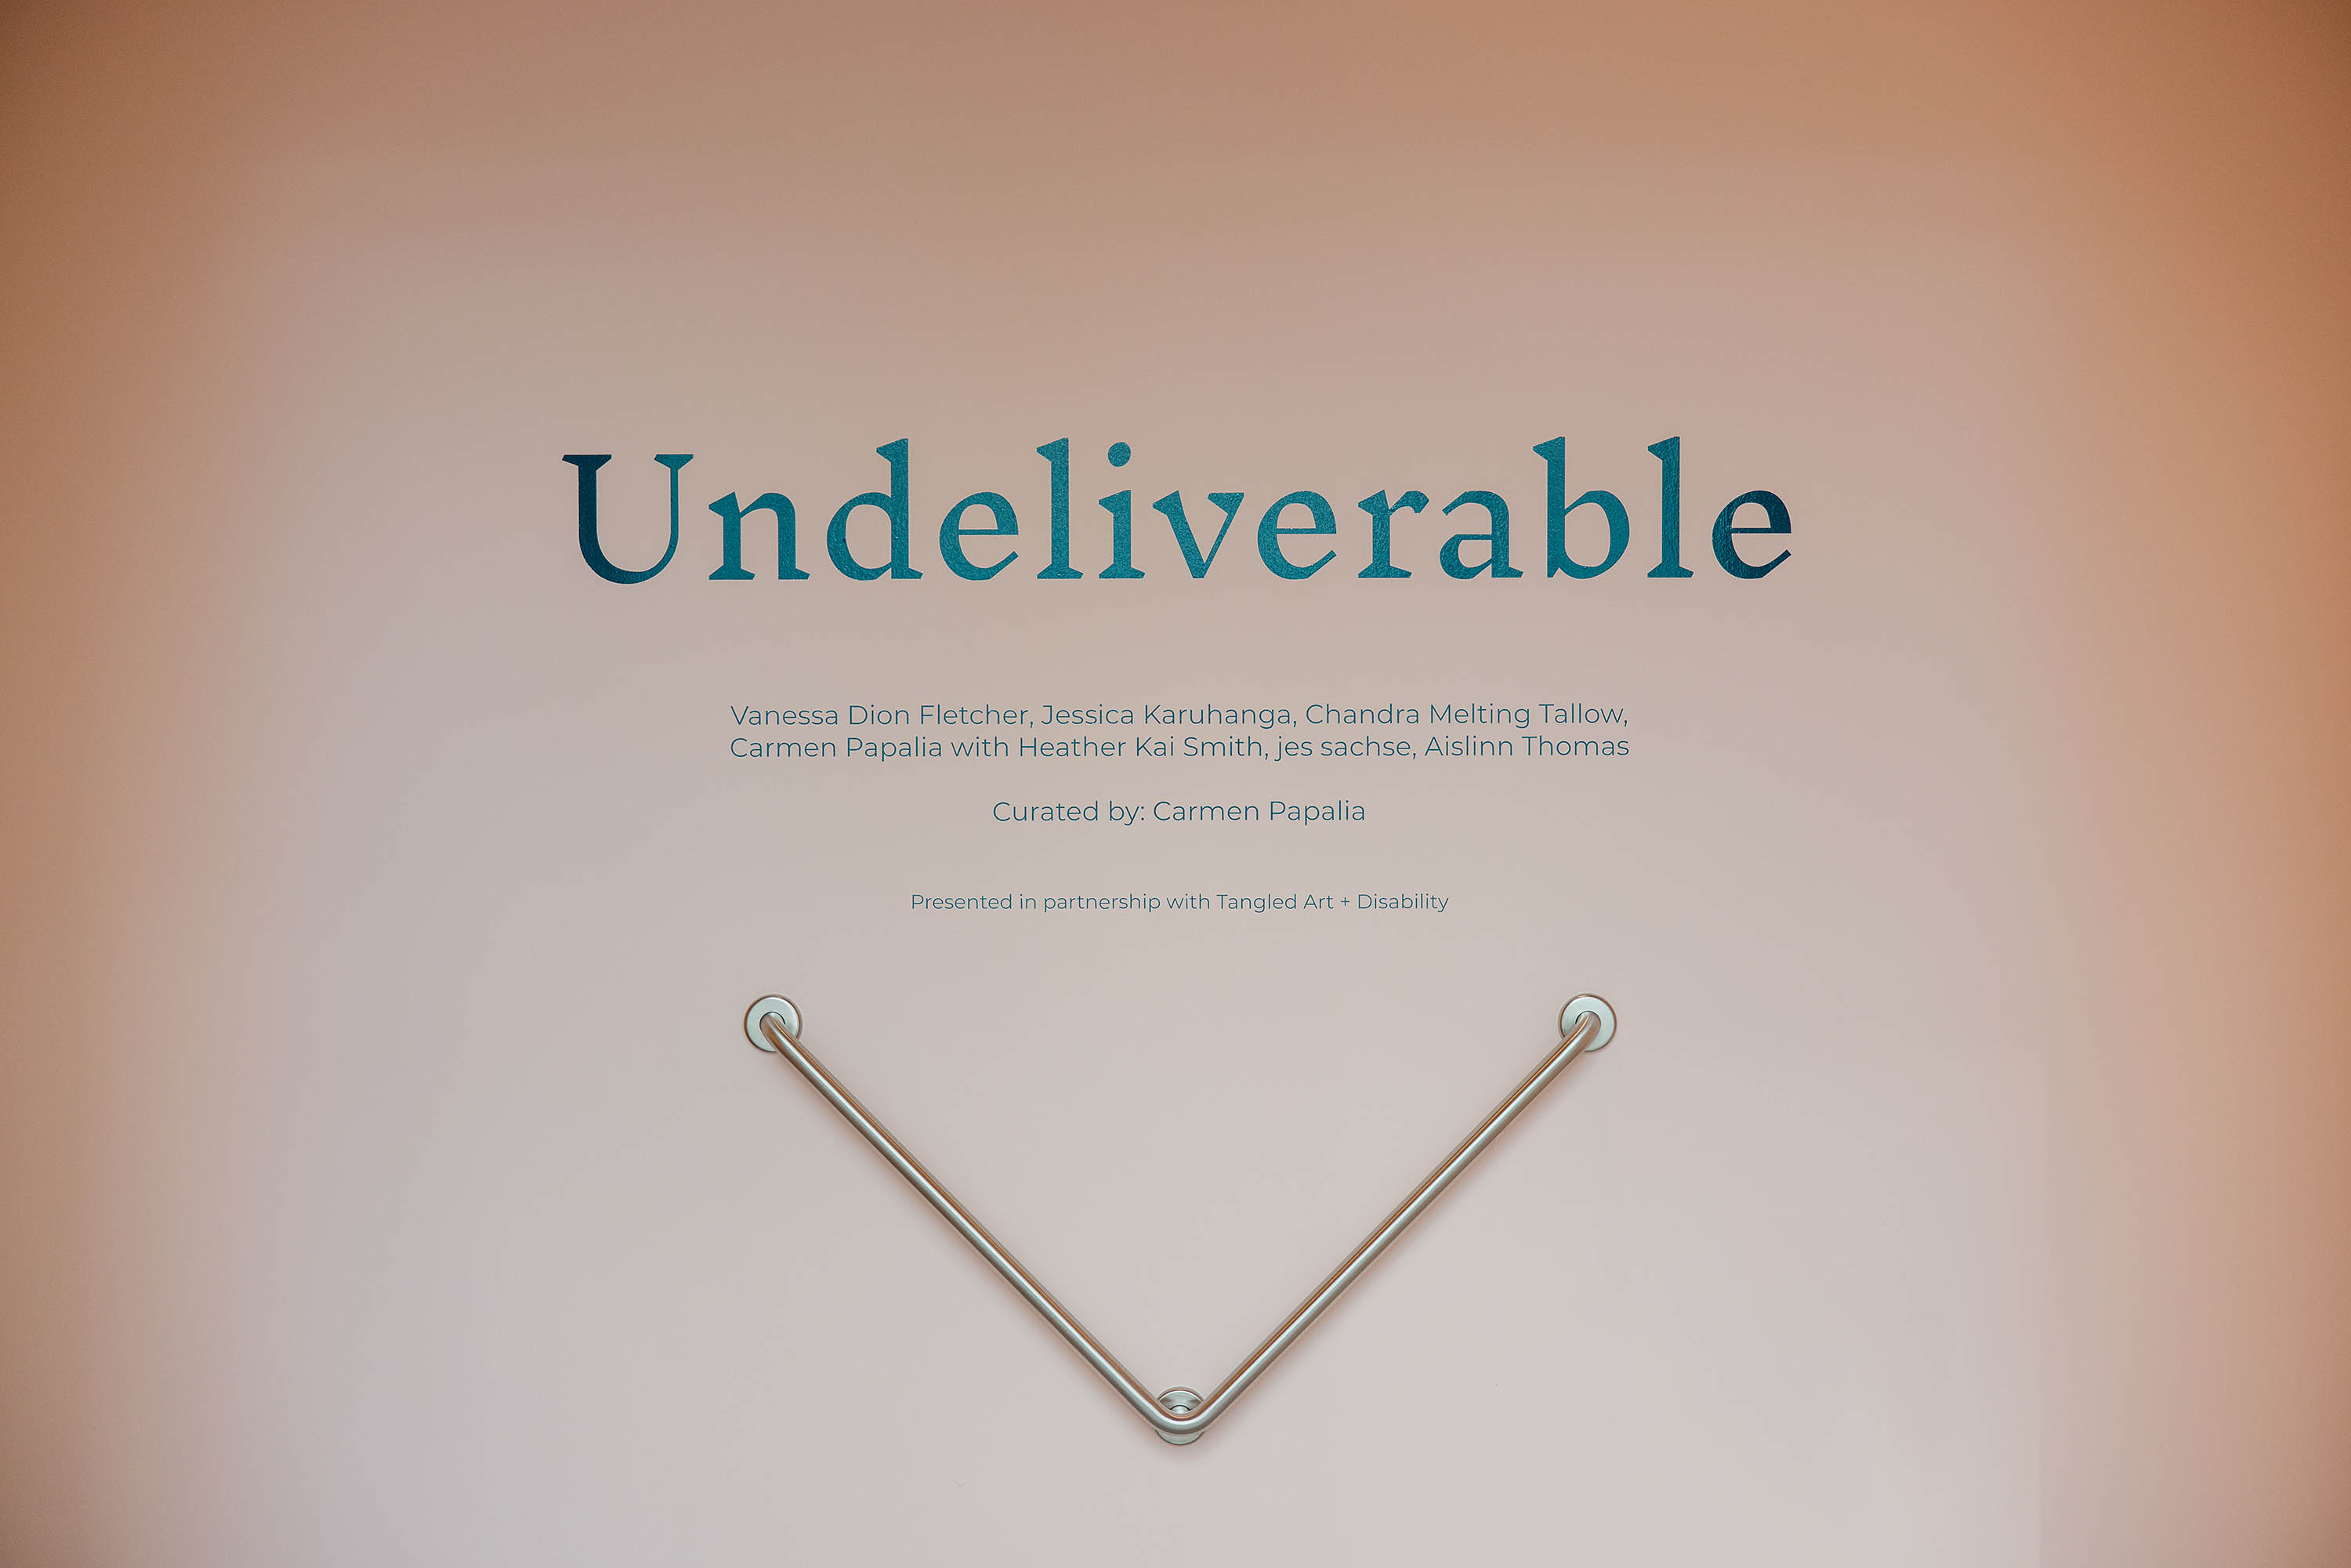 A wall with text that reads “Undeliverable” above a V-shaped grab-bar.